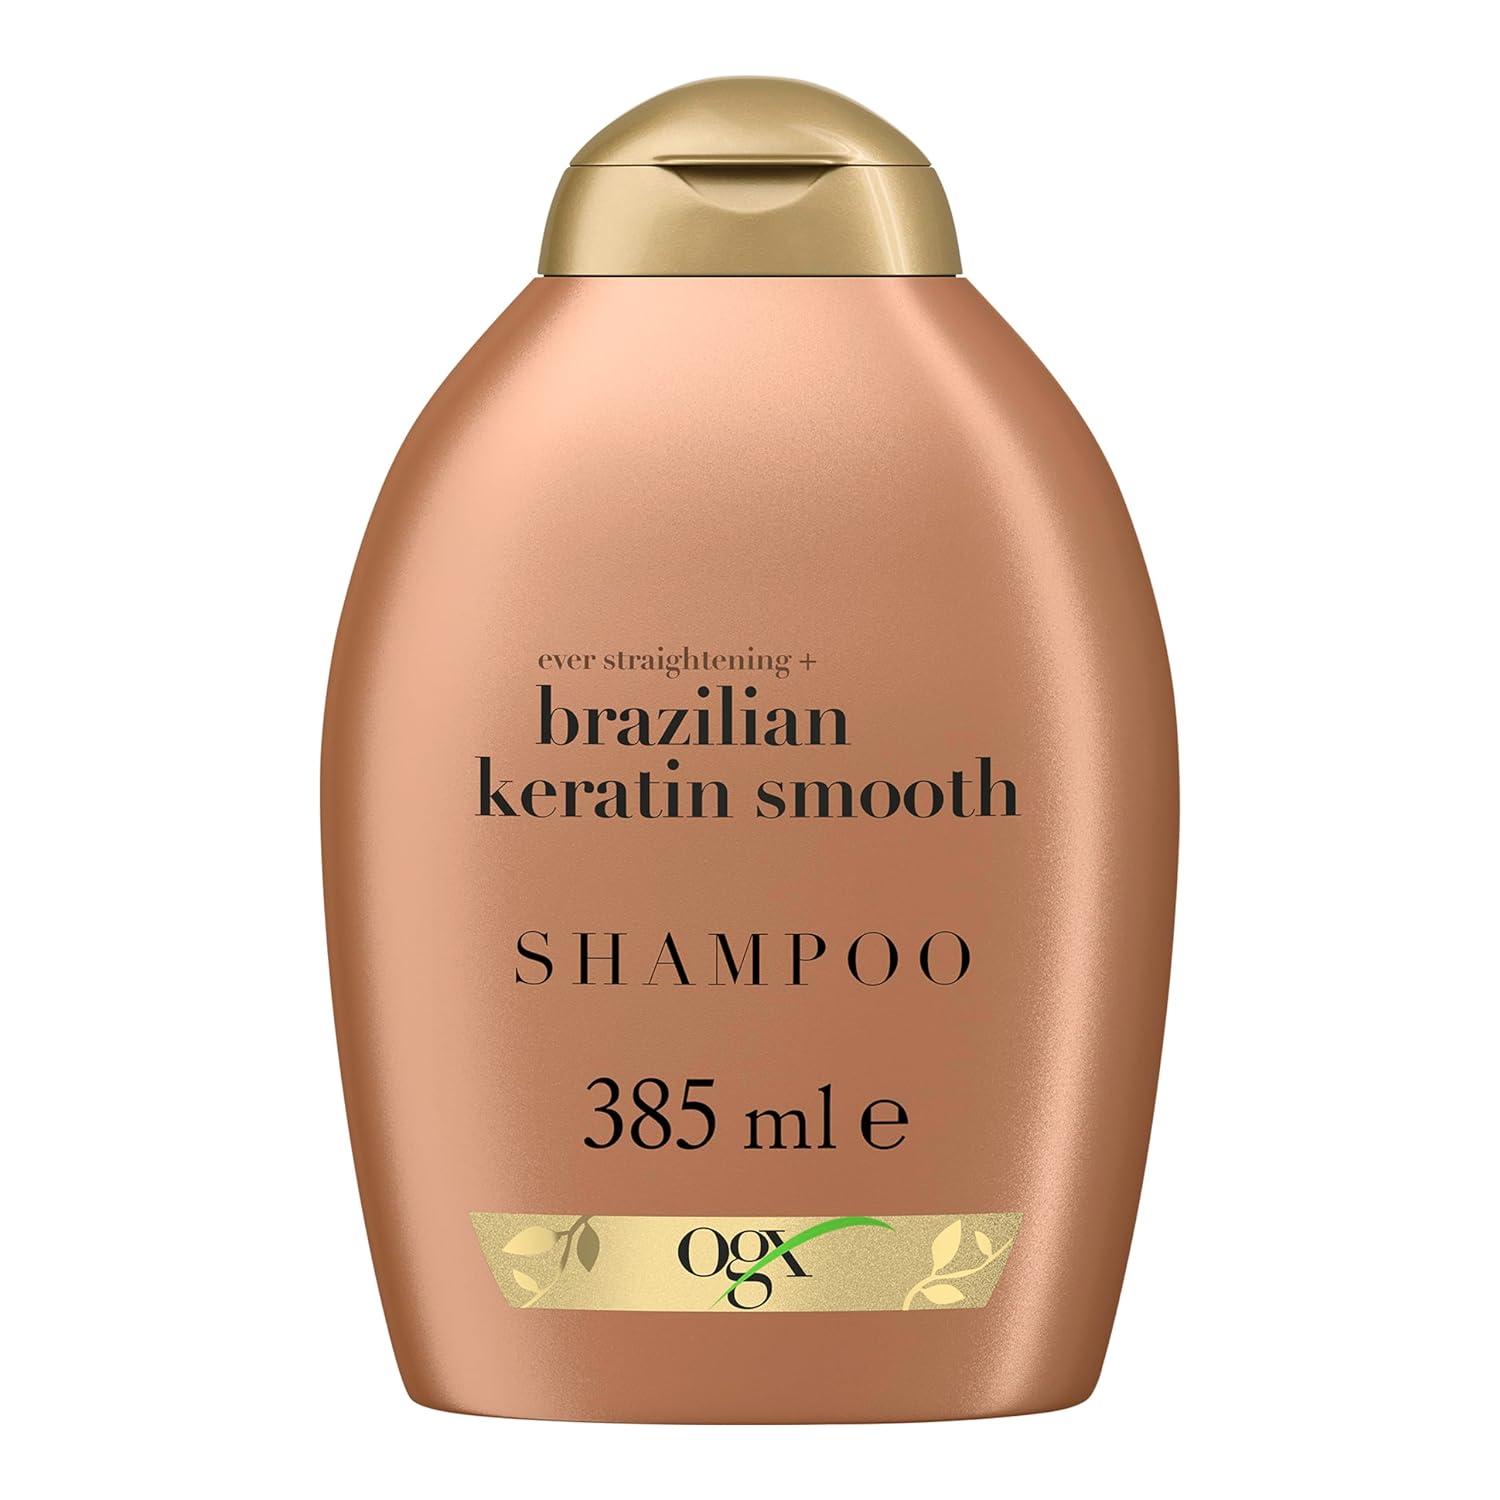 Best Shampoo with Keratin: Top 5 Keratin-Infused Shampoos for Strong and Silky Hair